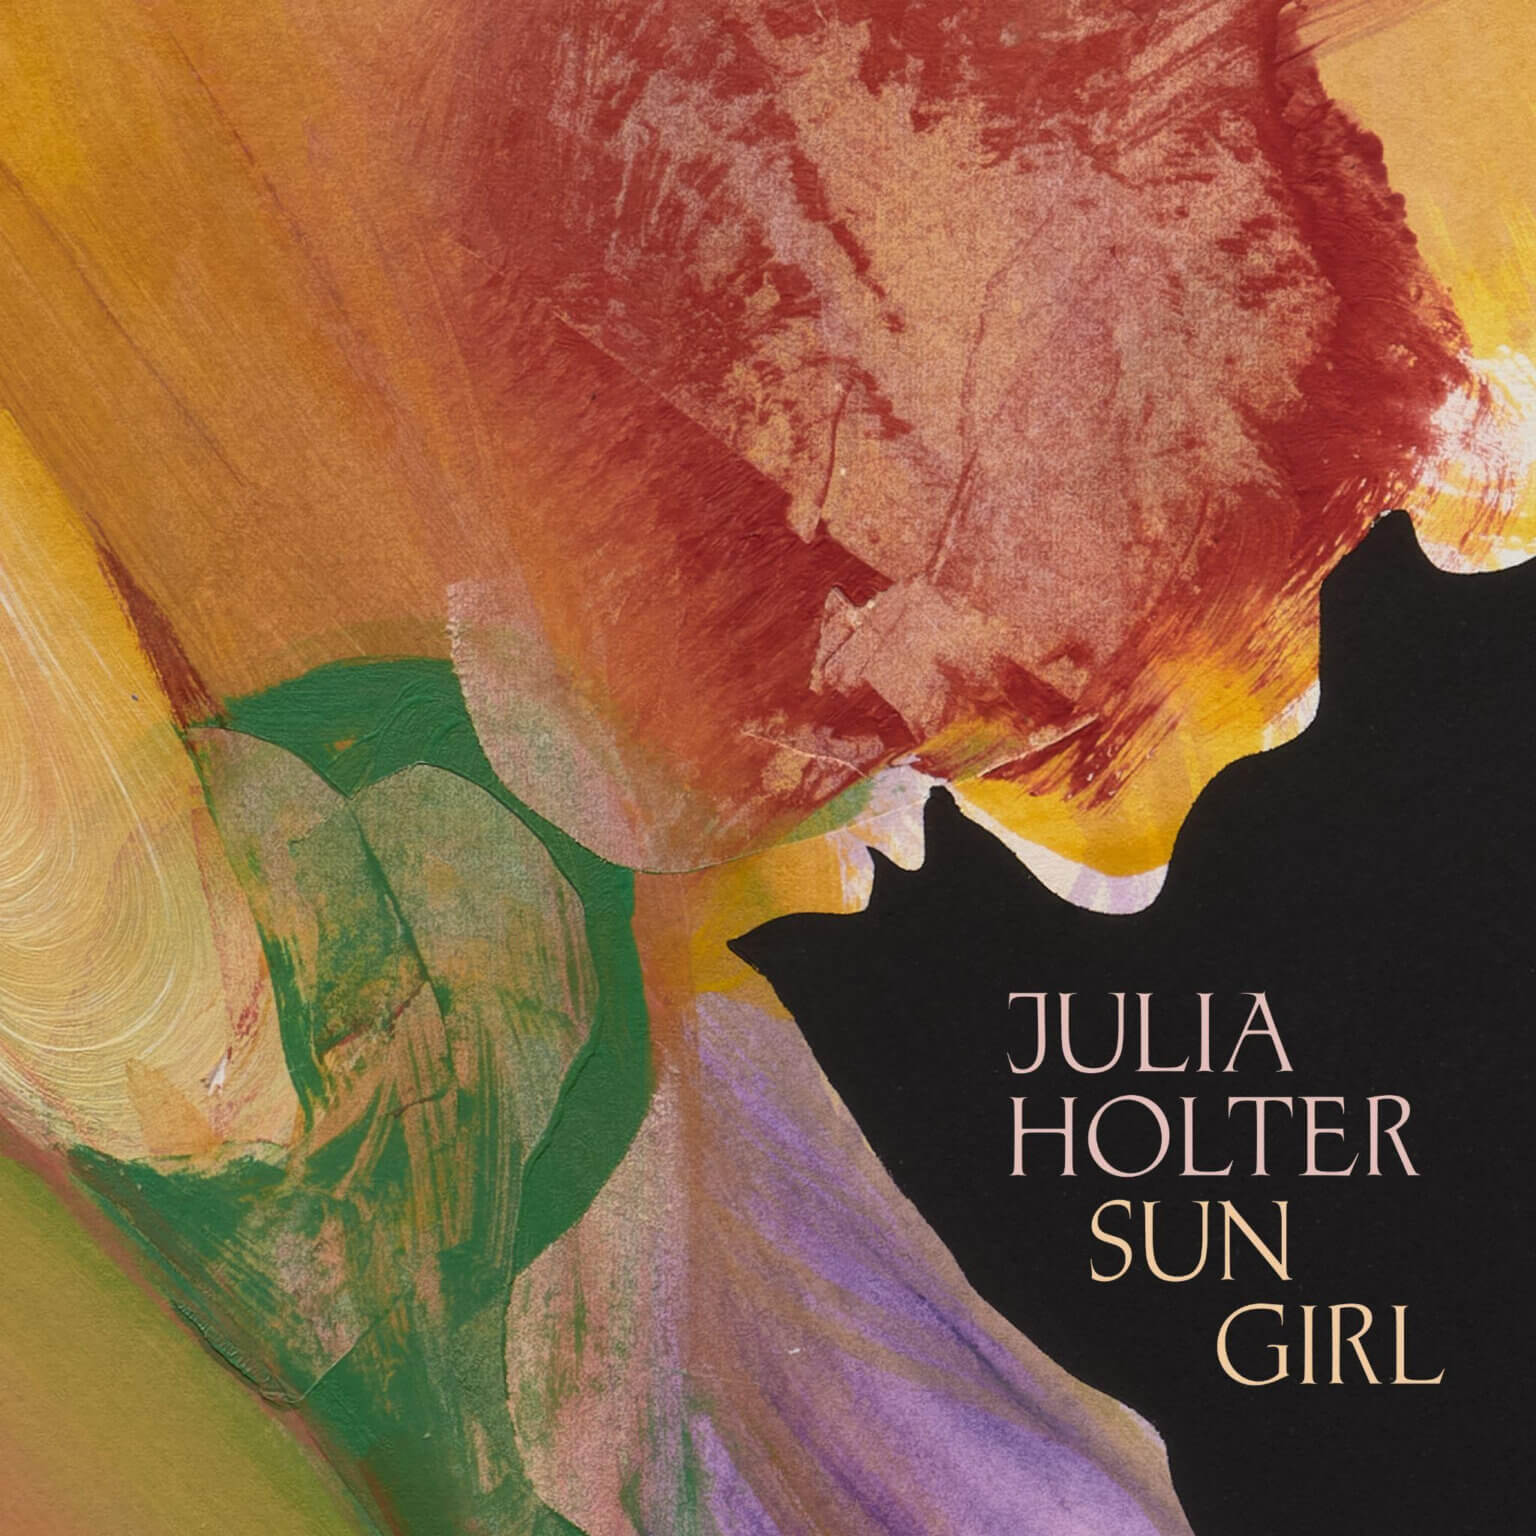 Julia Holter debuts new single "Sun Girl." The singer/songwriter's track is available today via Domino Records and DSPs